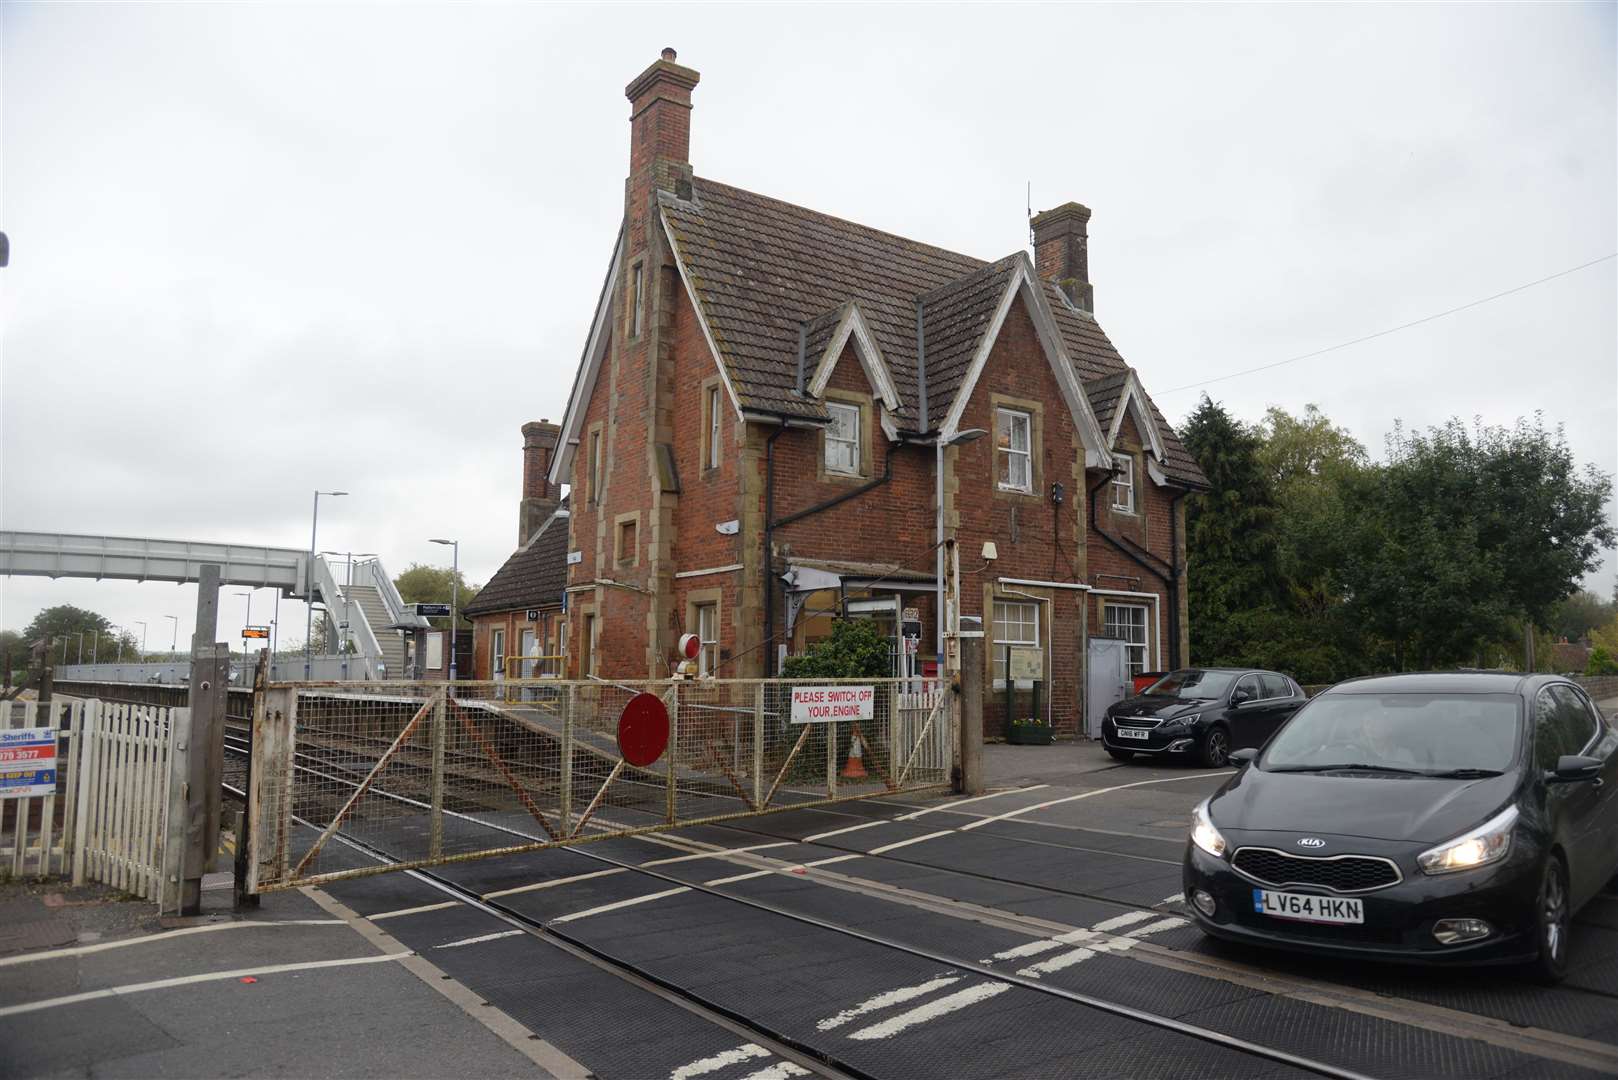 How the manned level crossing in Wye currently looks